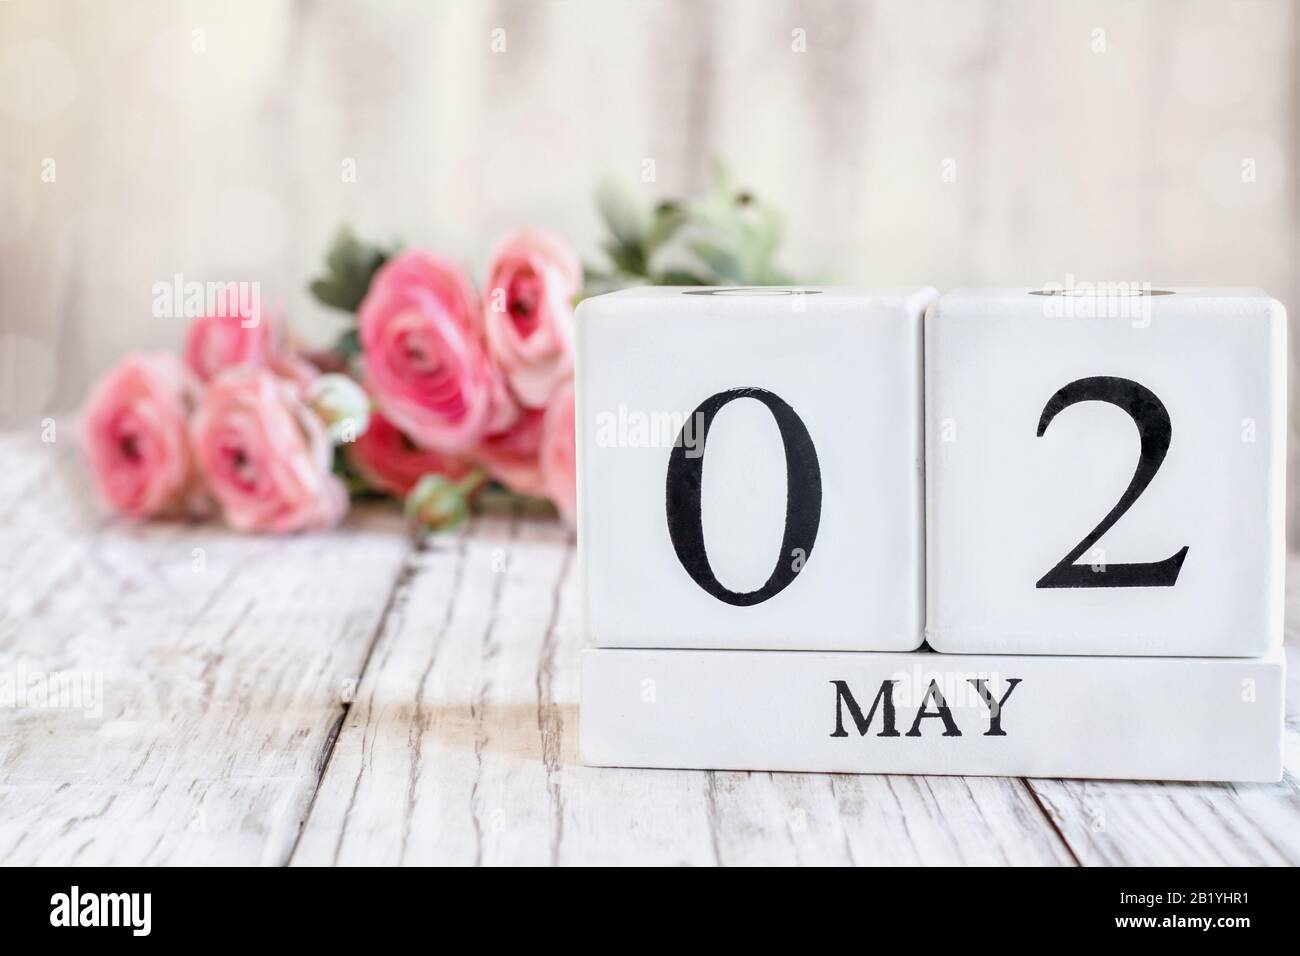 White wood calendar blocks with the date May 2nd. Selective focus with pink ranunculus in the background over a wooden table. Stock Photo